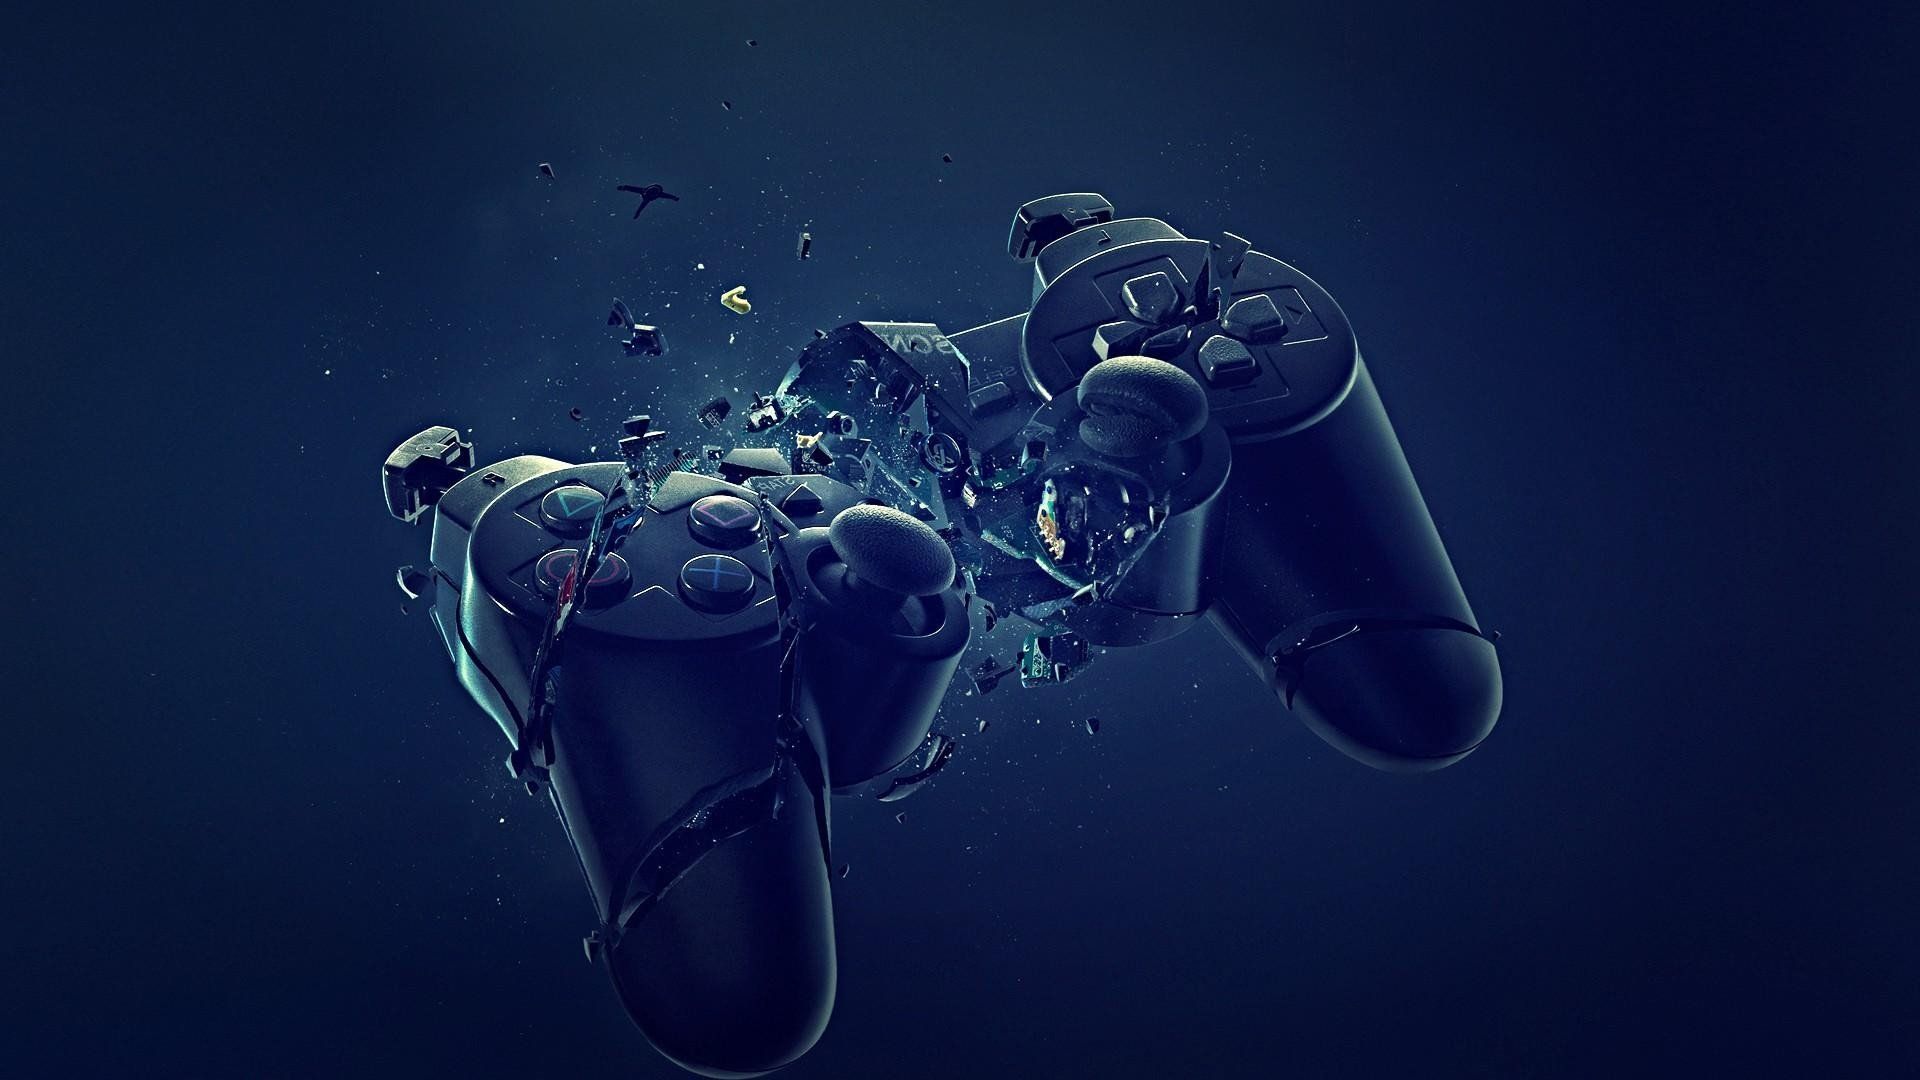 PS4 Controller Wallpaper Free PS4 Controller Background